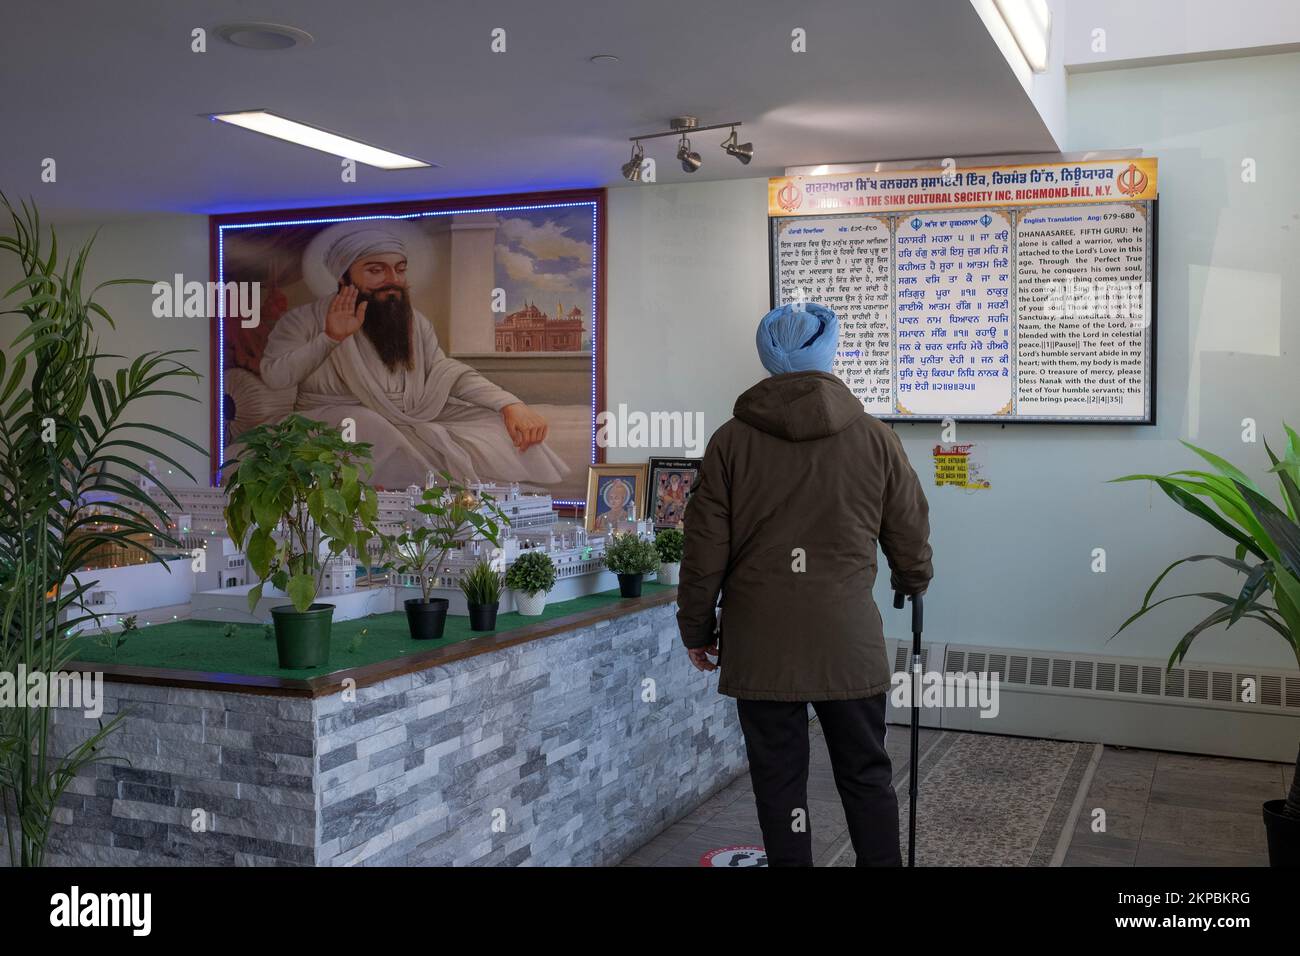 An unidentified older Sikh man reads a trilingual sign at the entrance to the Sikh Cultural Center in Richmond Hill, Queens, New York city. Stock Photo